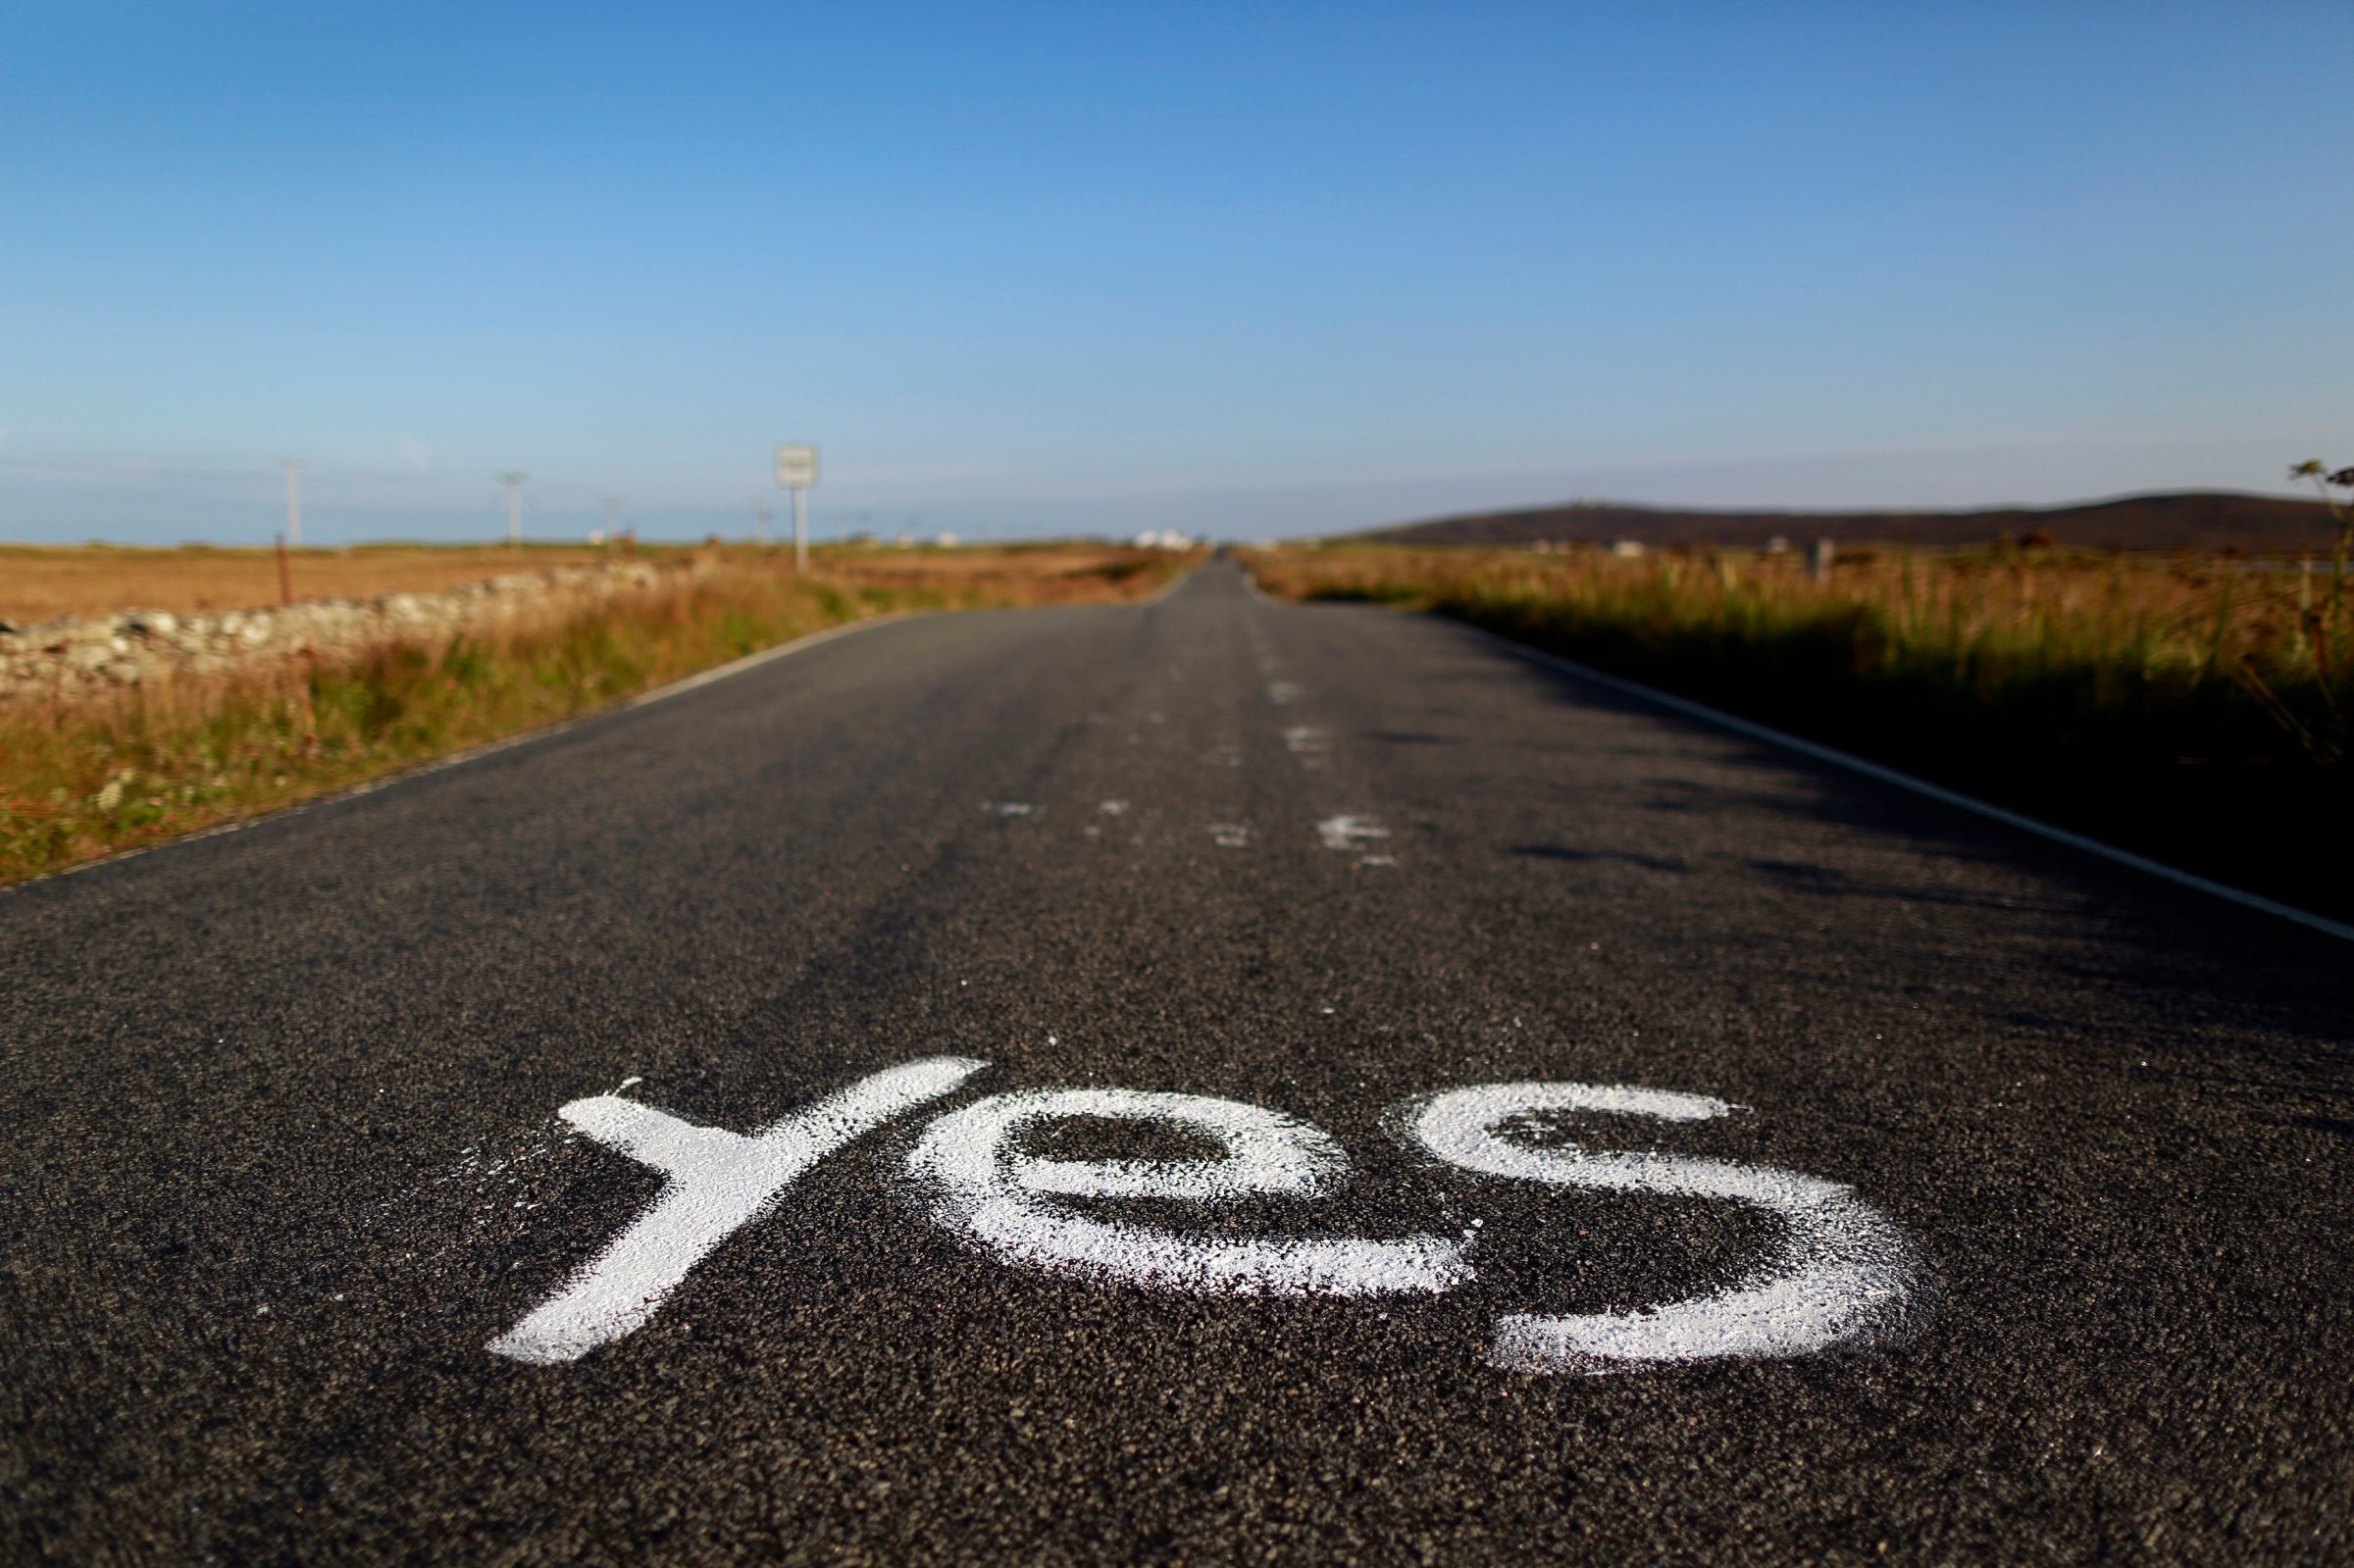 Graffiti supporting the "Yes" campaign is painted on a road in North Uist in the Outer Hebrides